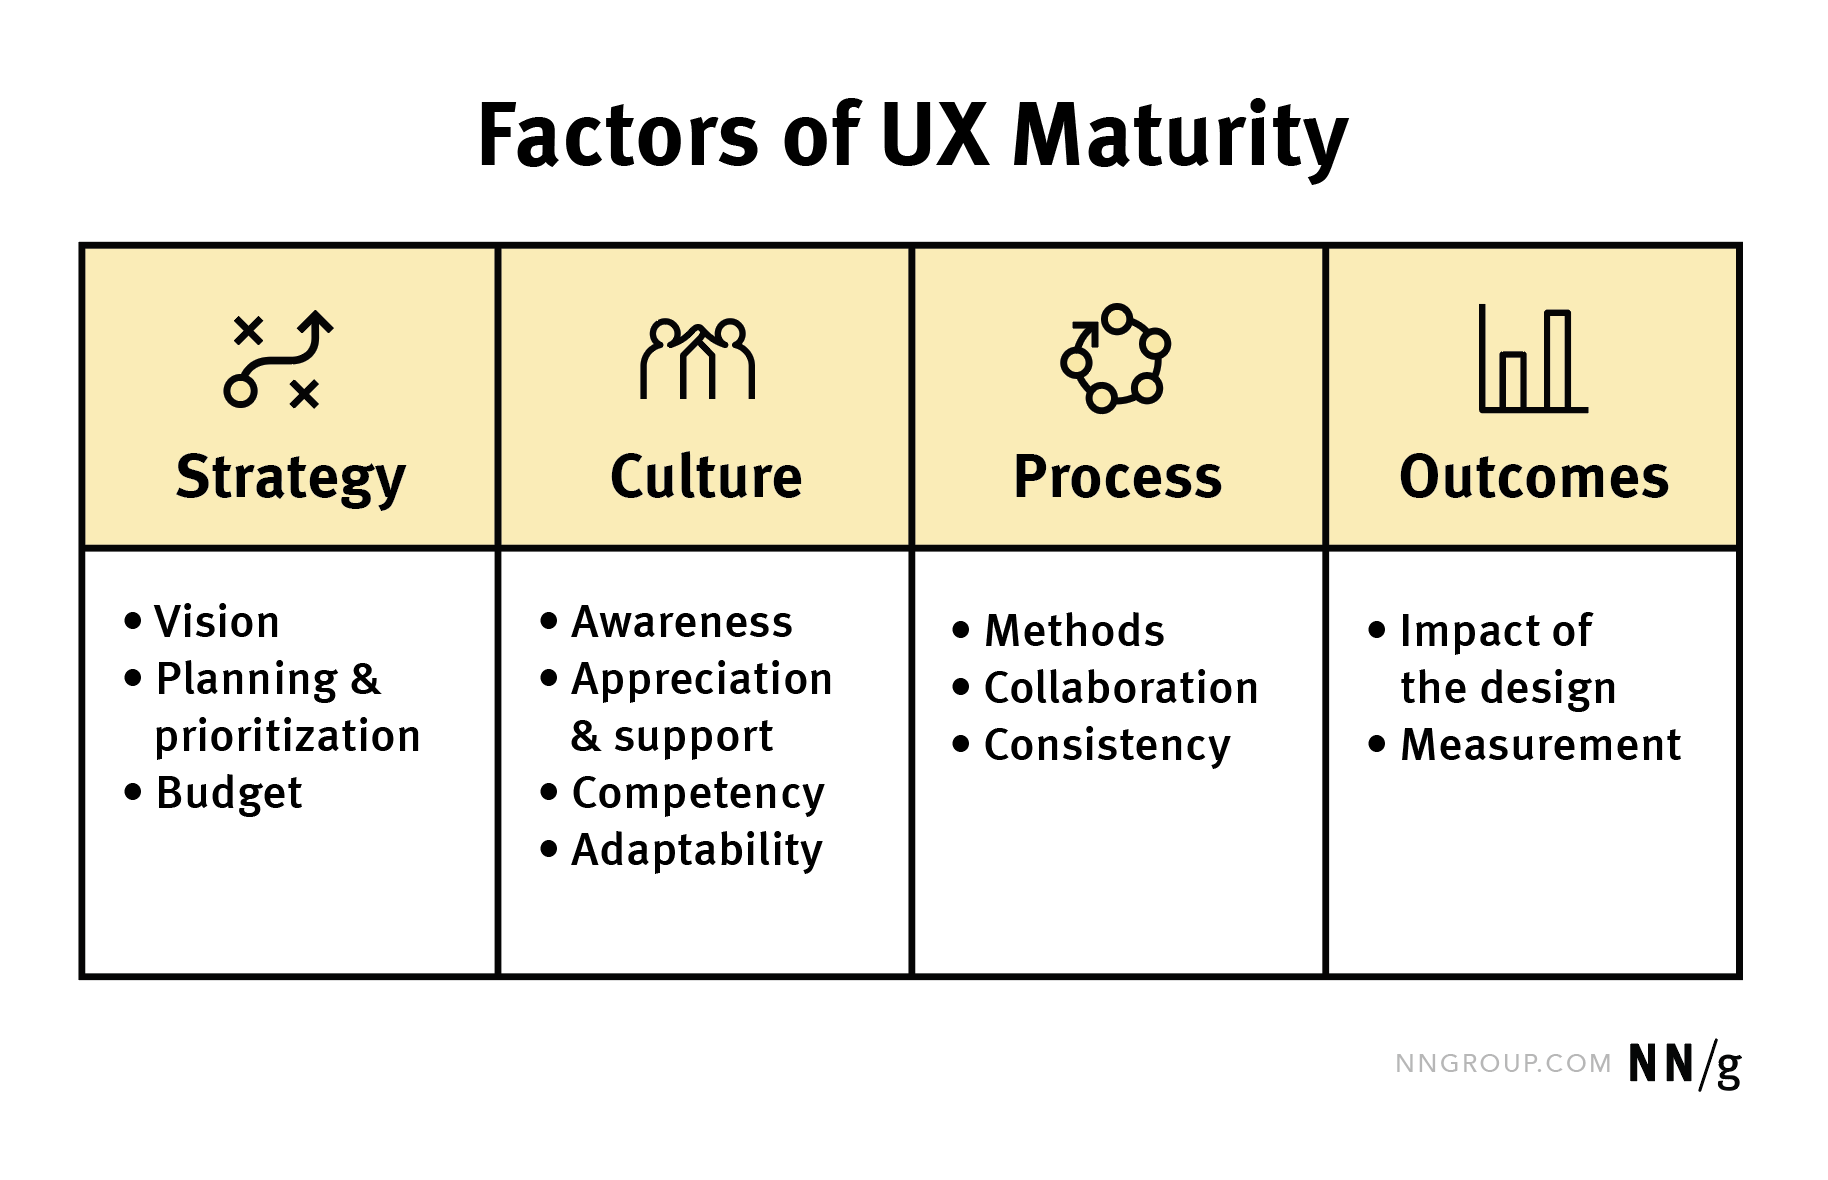 Factors of UX Maturity: Strategy, Culture, Process, and Outcomes